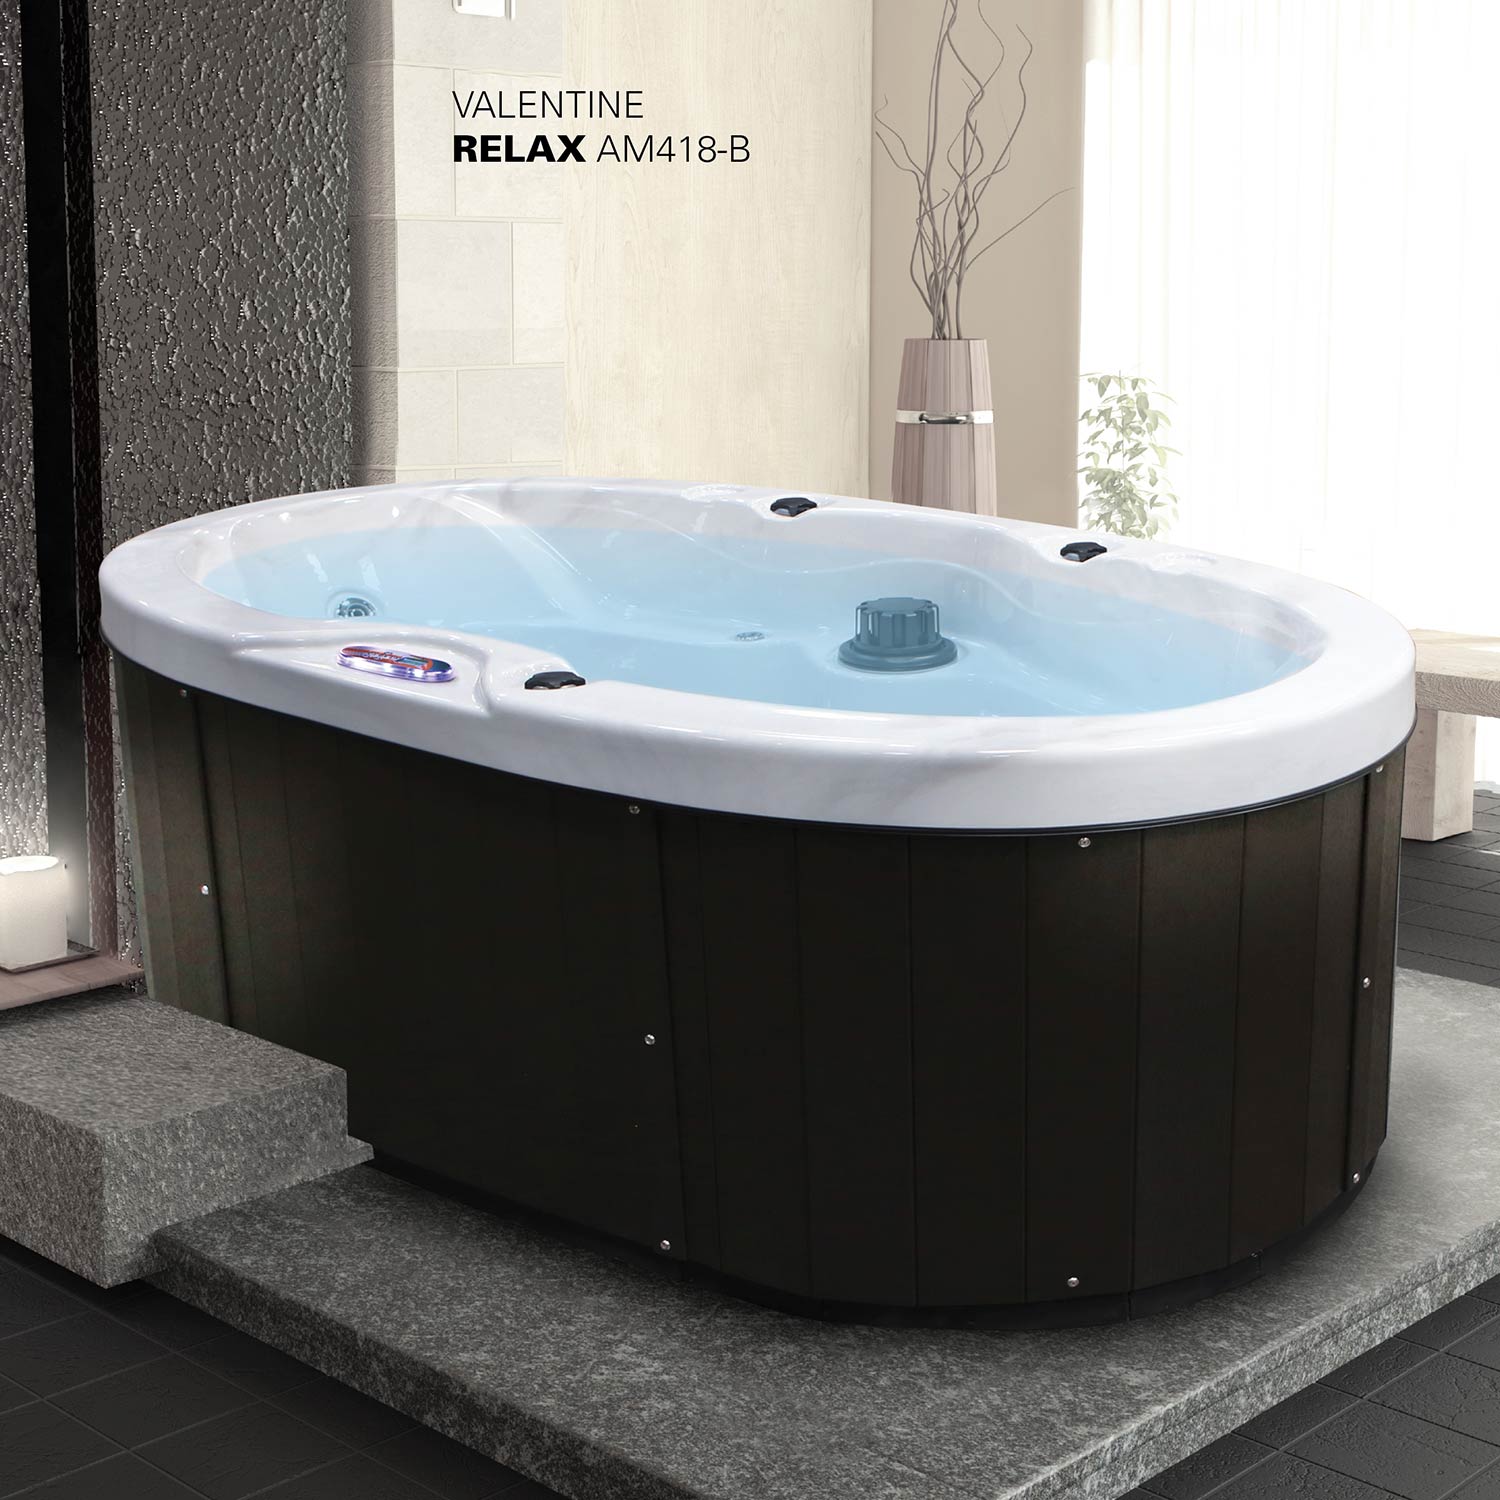 American Spas Am 418b W 2 Person 18 Jet Valentine Spa Hot Tub With Bluetooth Stereo System Subwoofer And Backlit Led Waterfall Handrail